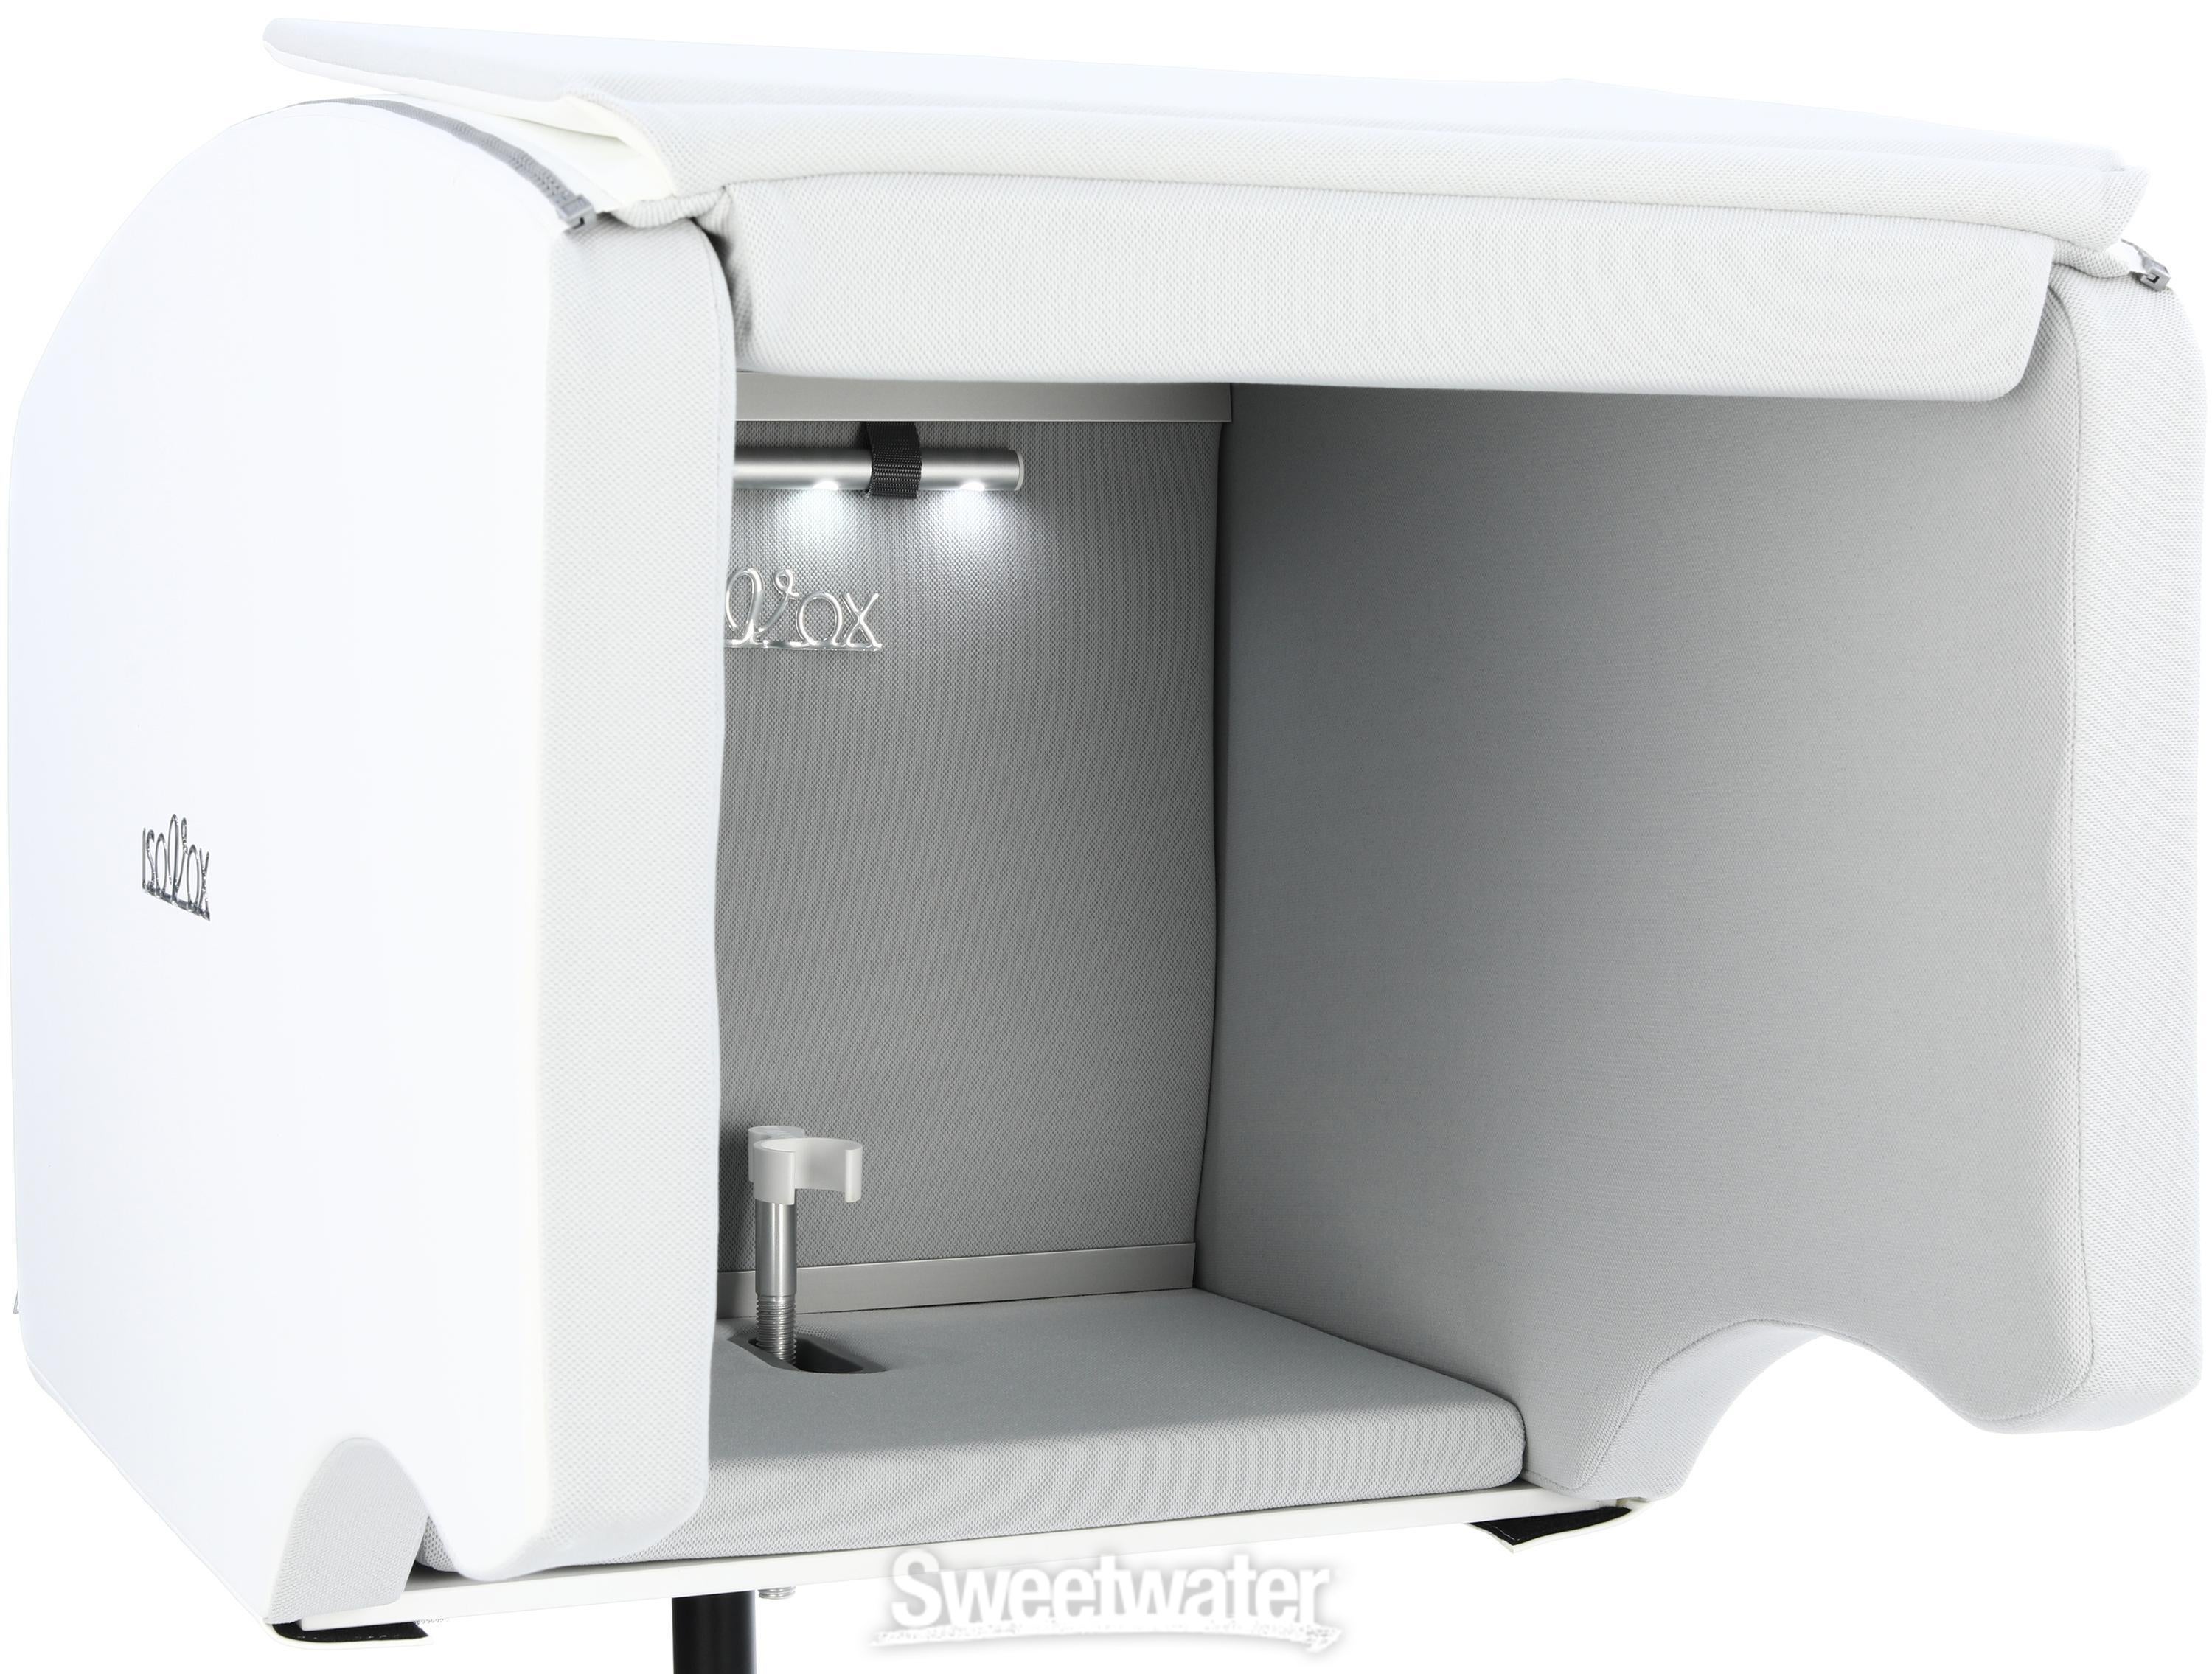 ISOVOX 2 Home Vocal Booth - White | Sweetwater